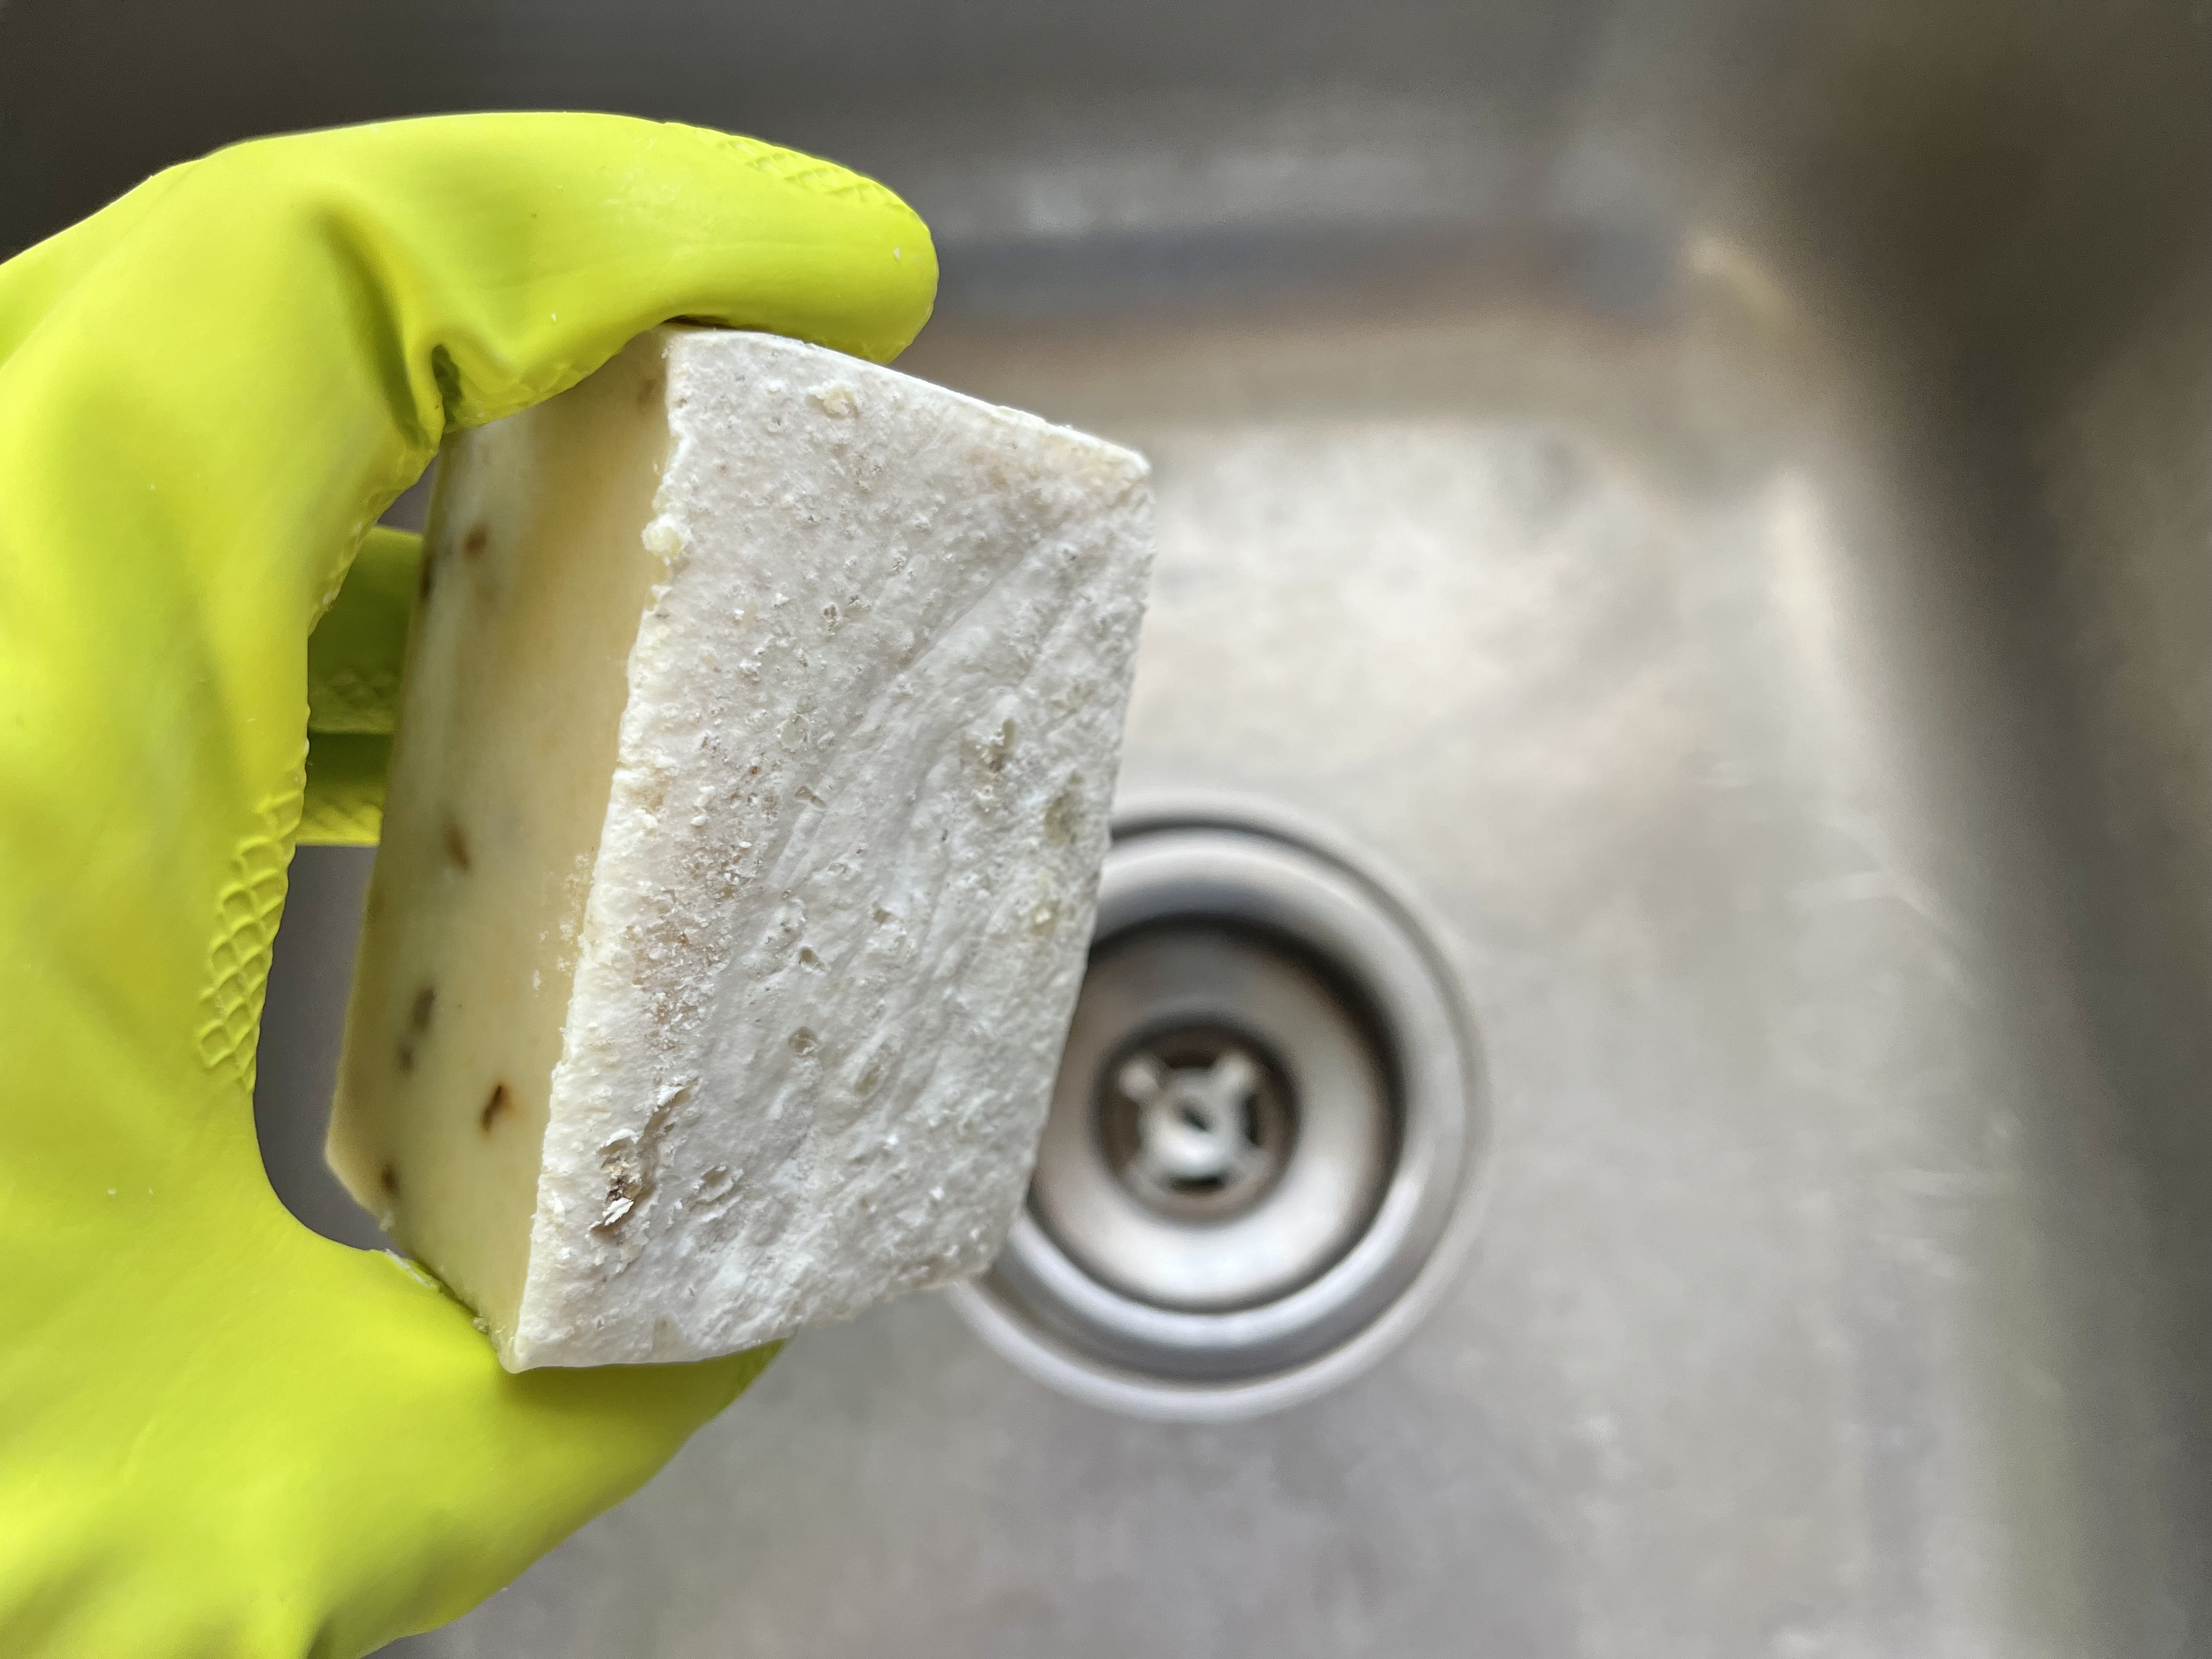 holding a bar of soap that the soda ash needs removed